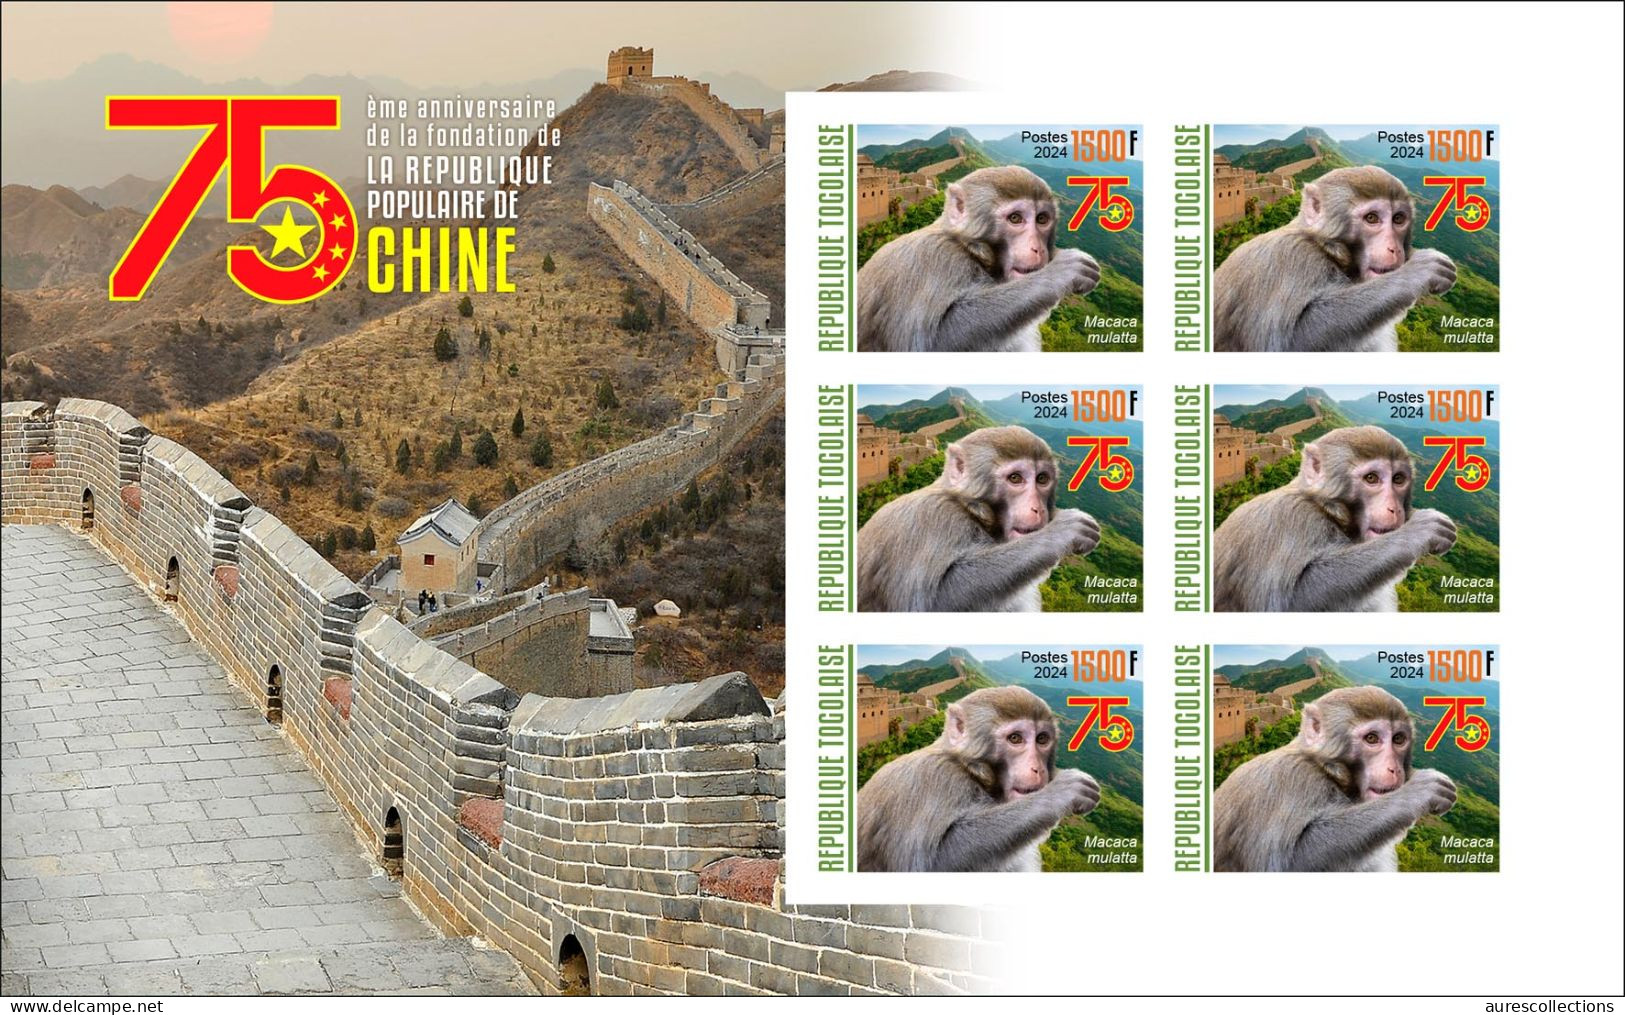 TOGO 2024 PACK 6 SHEET IMPERF - CHINA 75TH ANNIVERSARY - QIN SHI HUANG - TURTLE TURTLES FROG FROGS MONKEY PANDA - MNH - Tortues